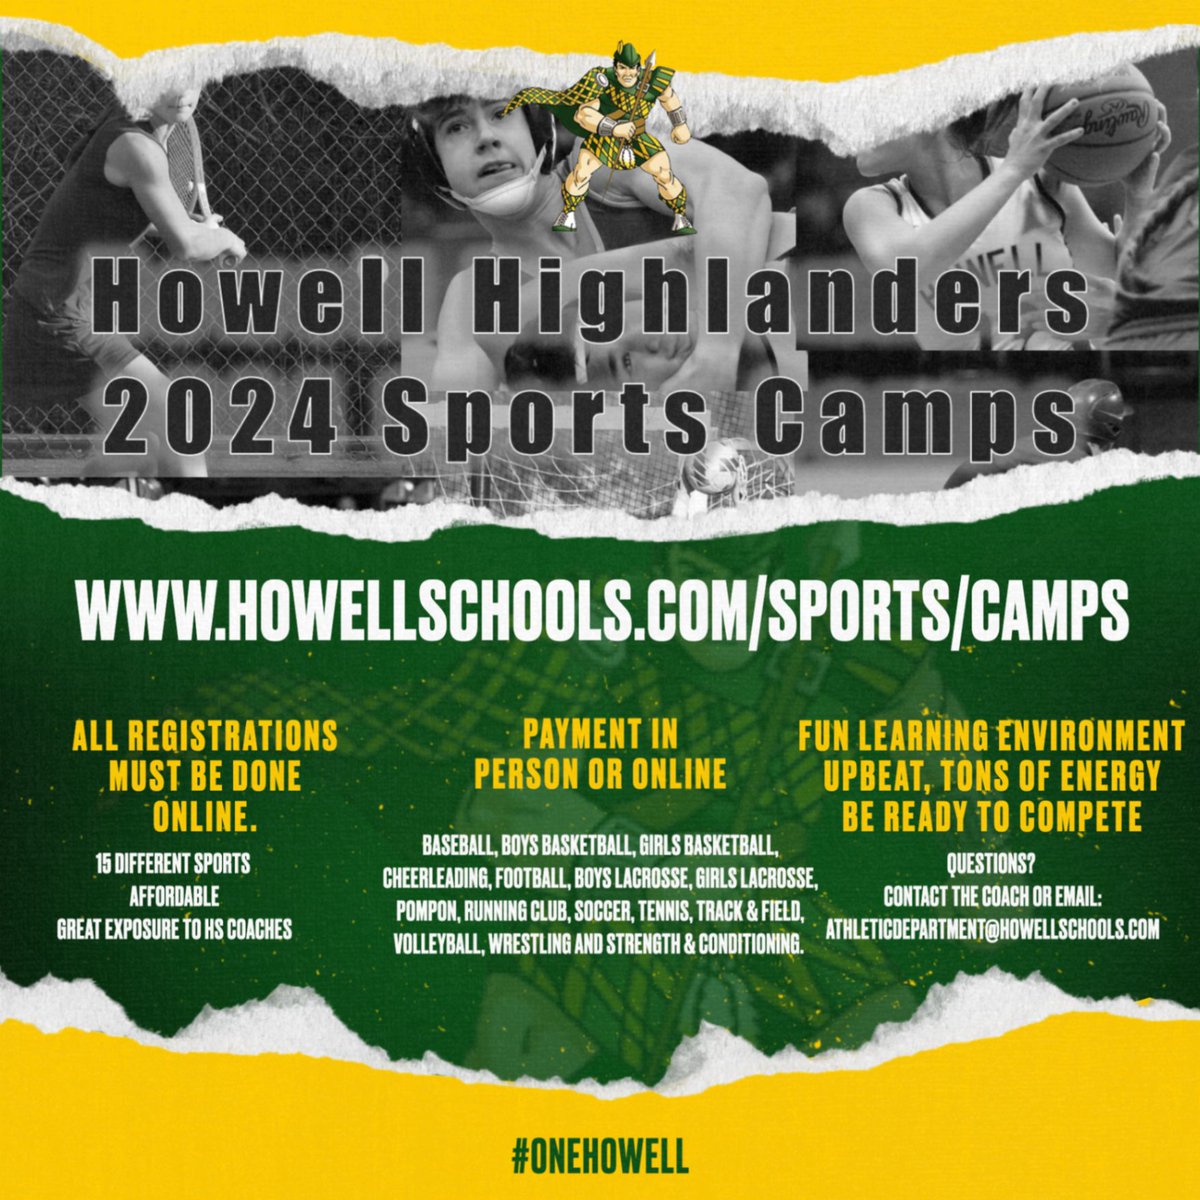 Don't forget to sign up your Highlander for summer sports camps! Several camps begin on June 3rd...we hope to see you there! Some new options this year include; Track & Field and multiple Strength & Conditioning camps for 5th to 8th graders! #JoinTheFun #OneHowell